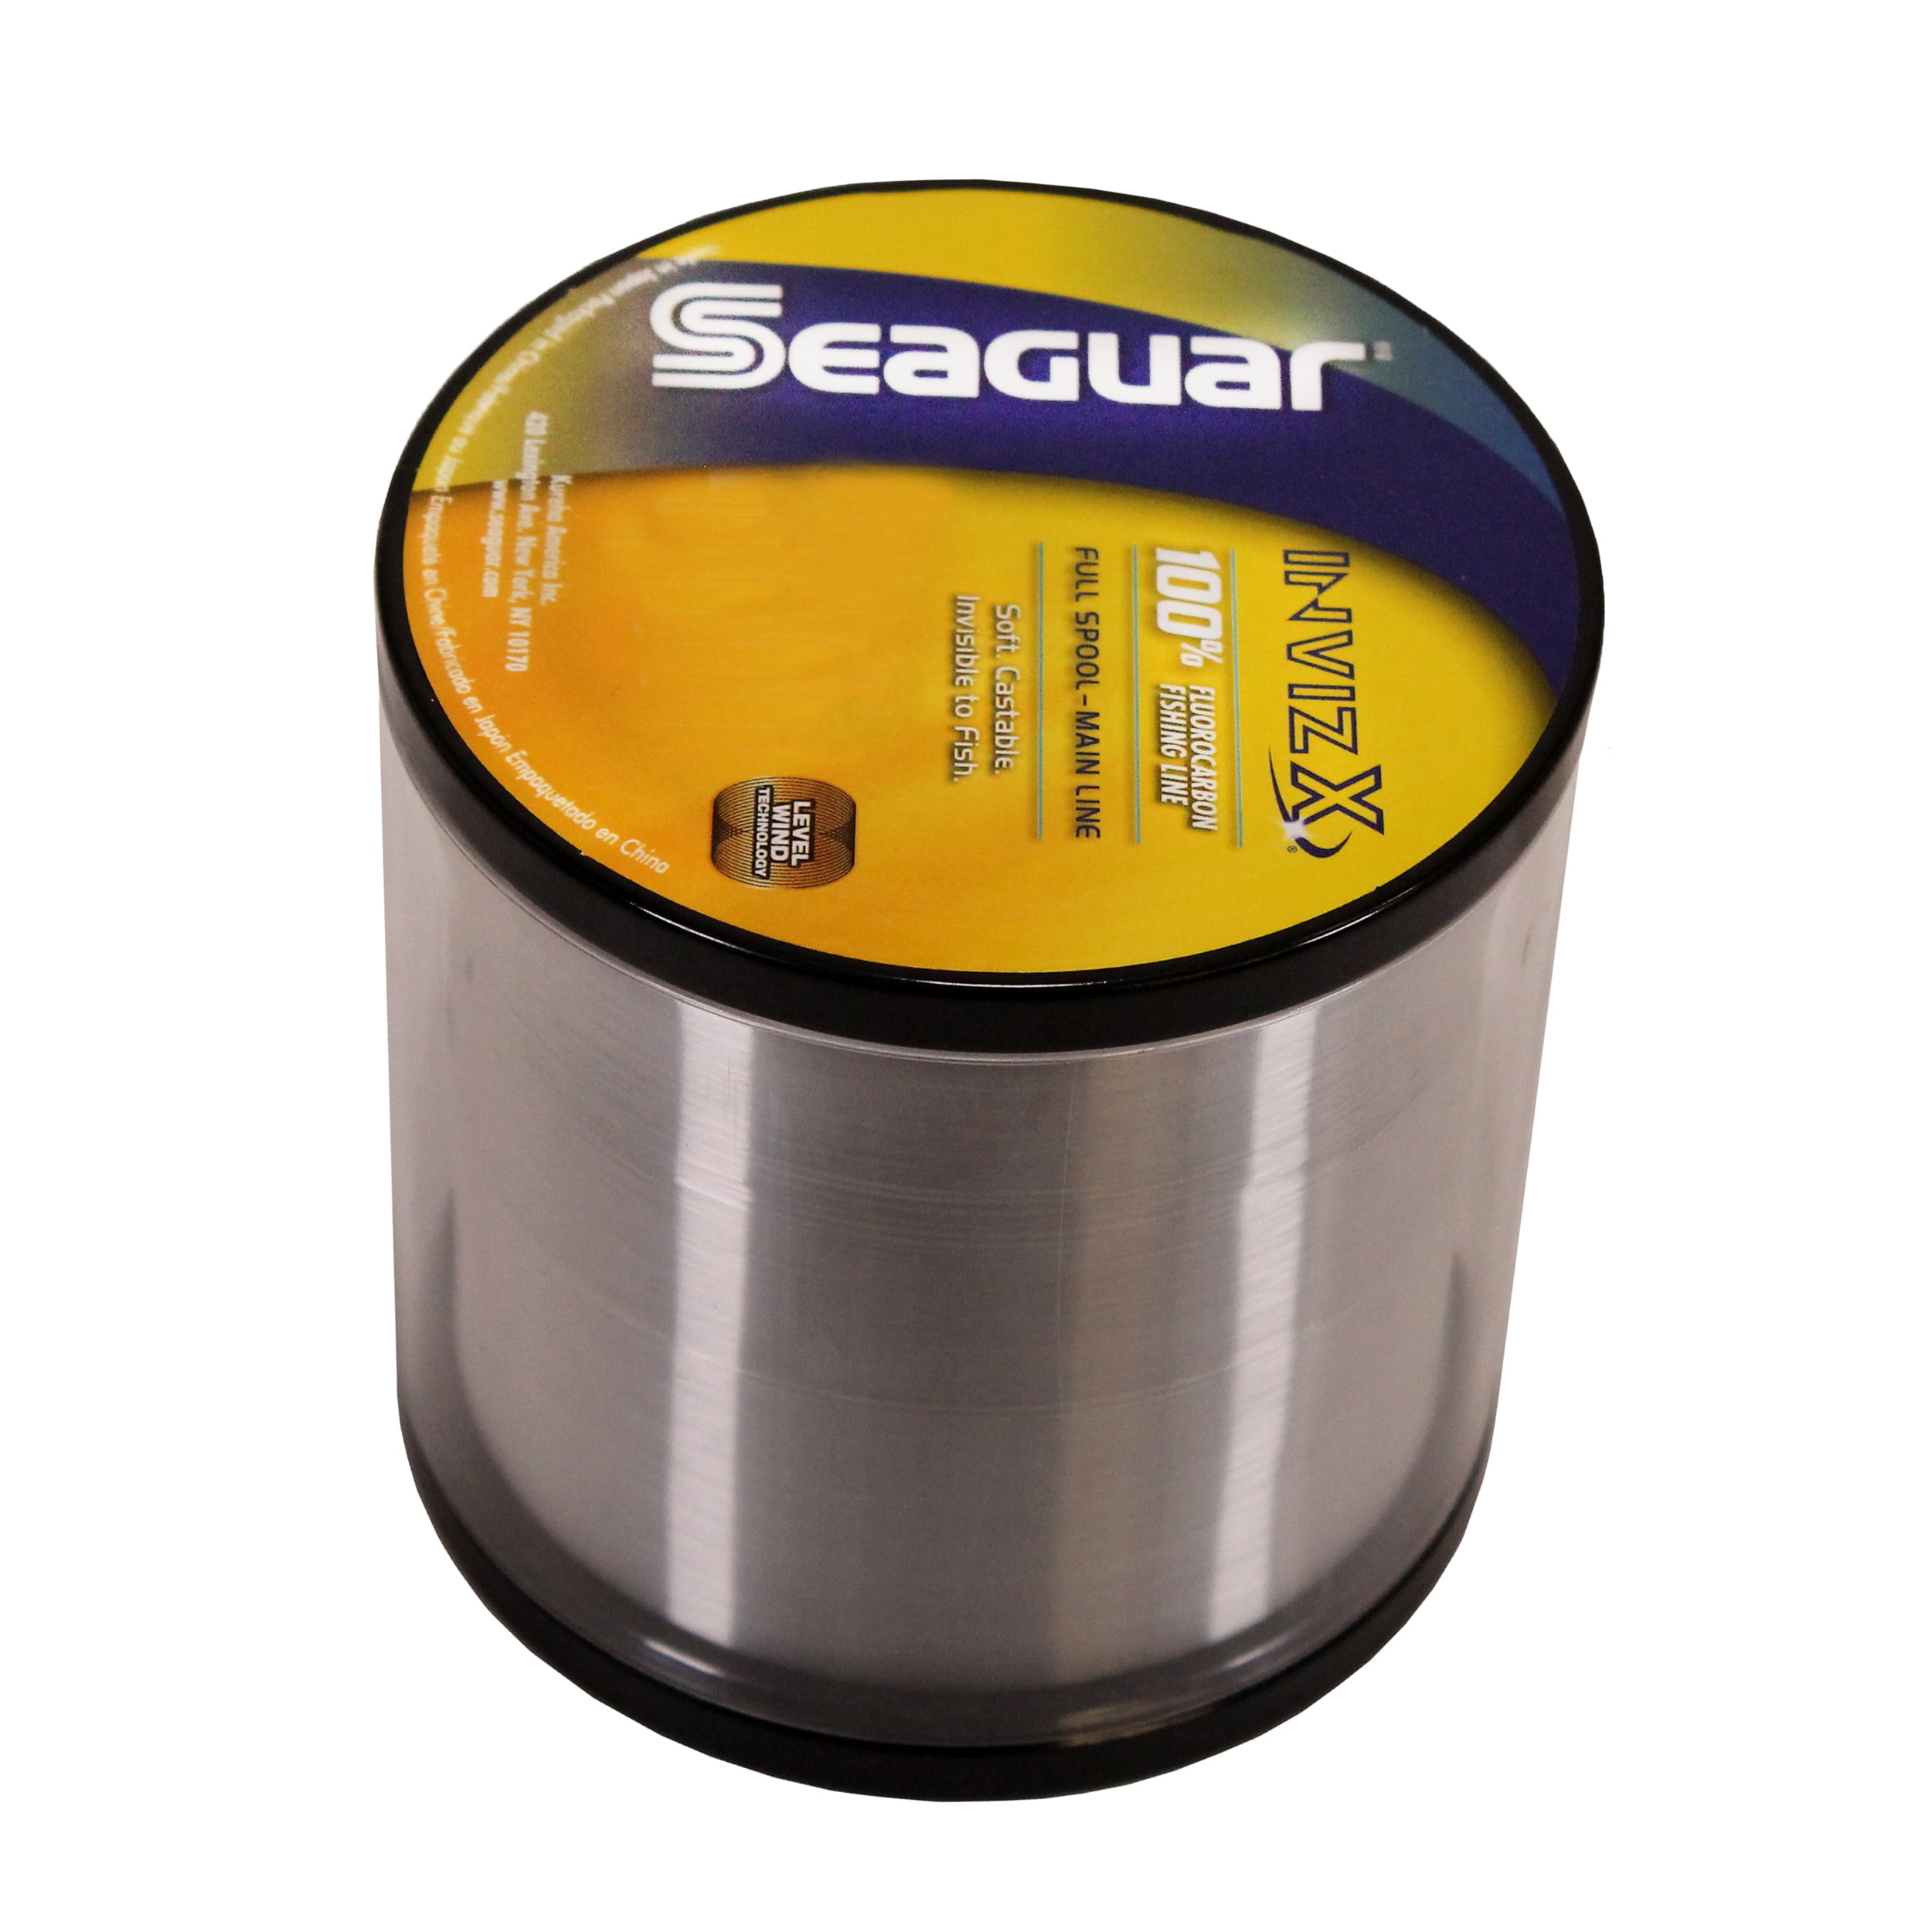 Seaguar IceX 100% Fluorocarbon Ice Fishing Line 50yd 8lb Clear